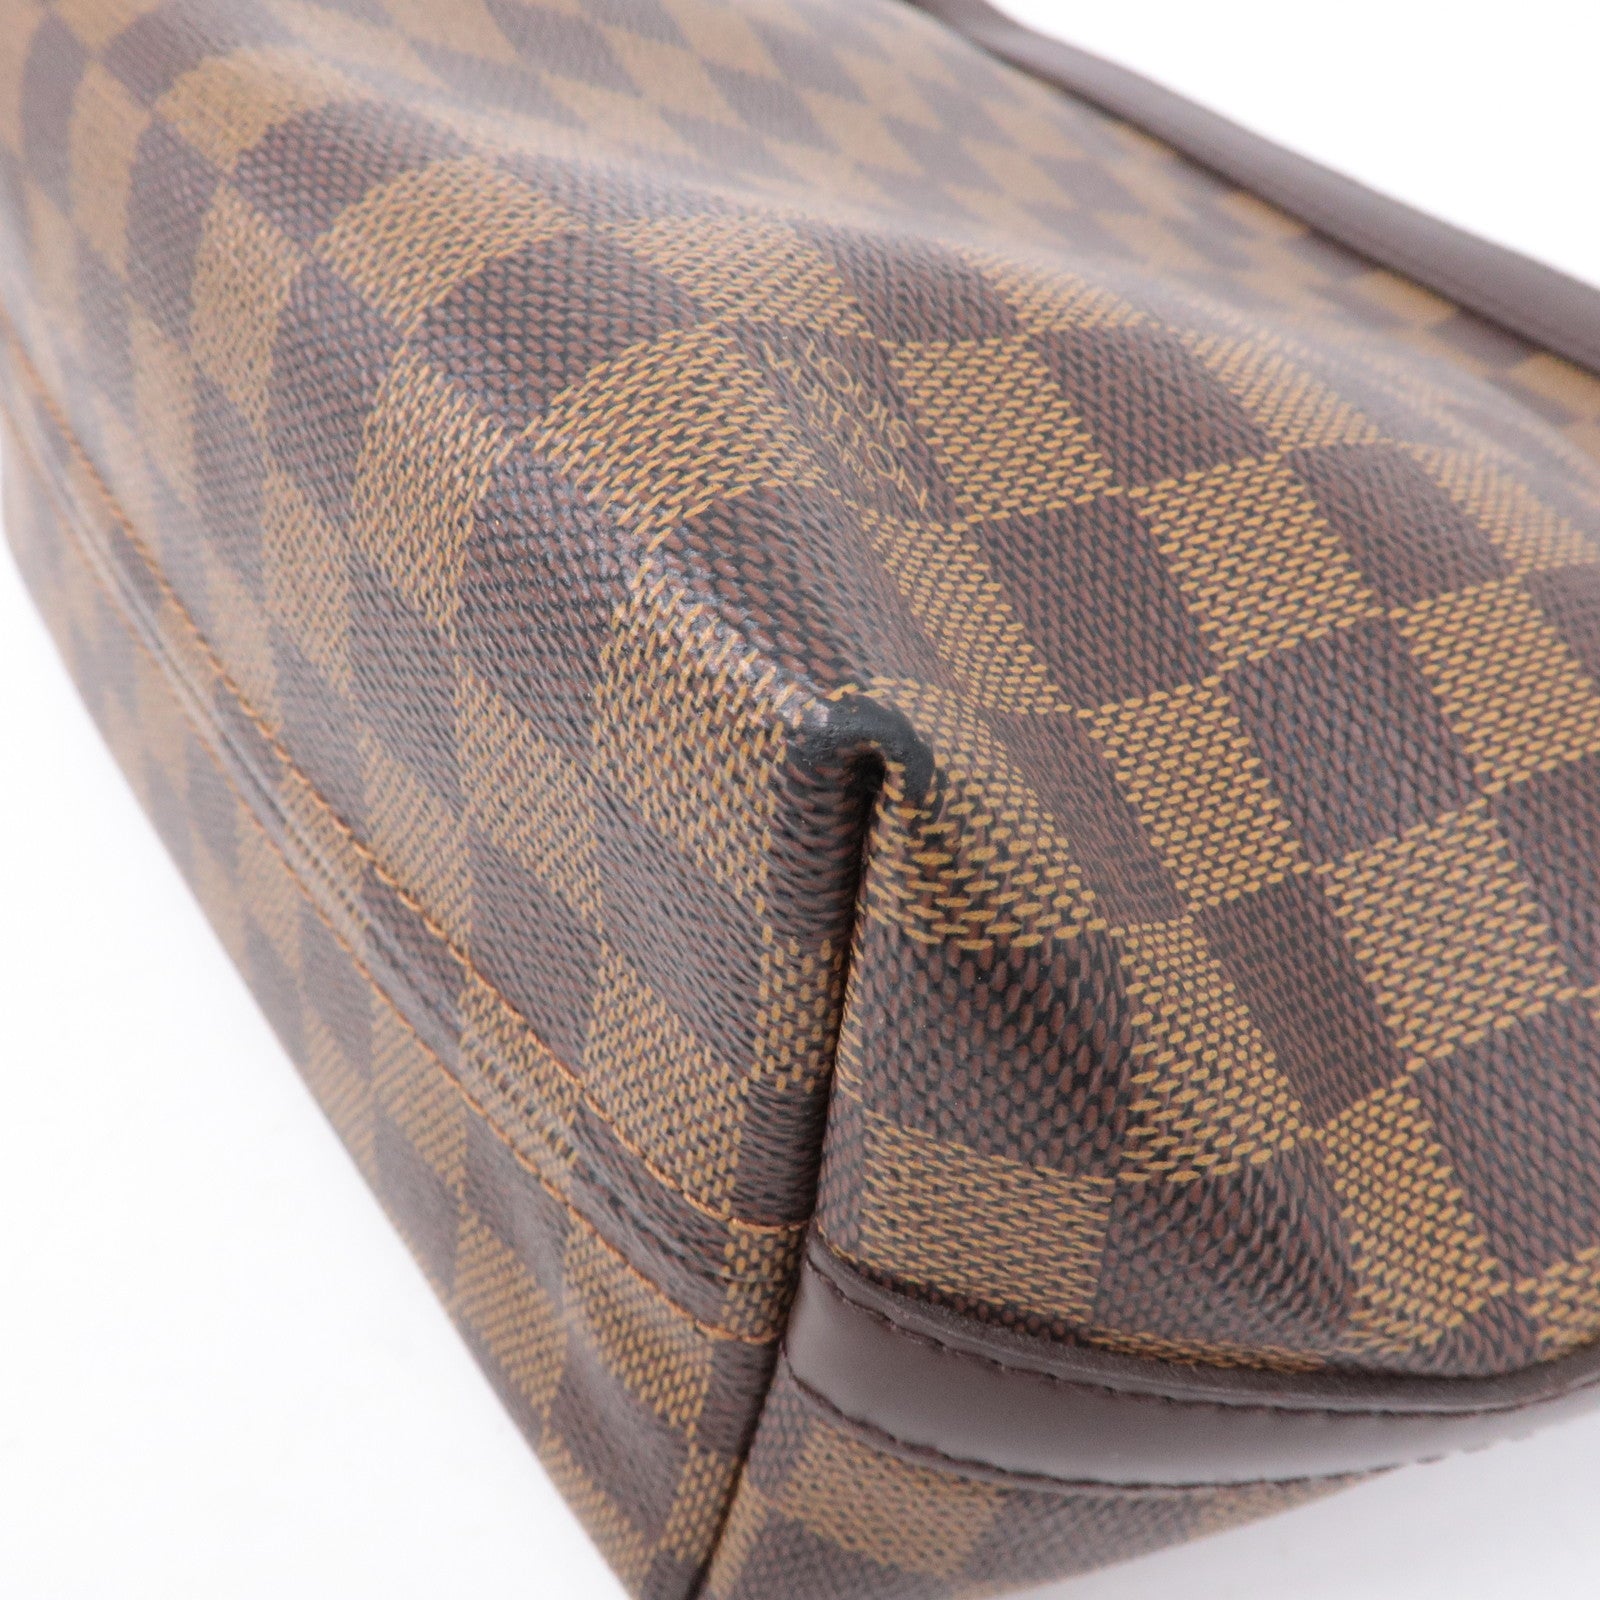 LOUIS VUITTON LV N51995 Damier Brown Leather Illovo MM Shoulder